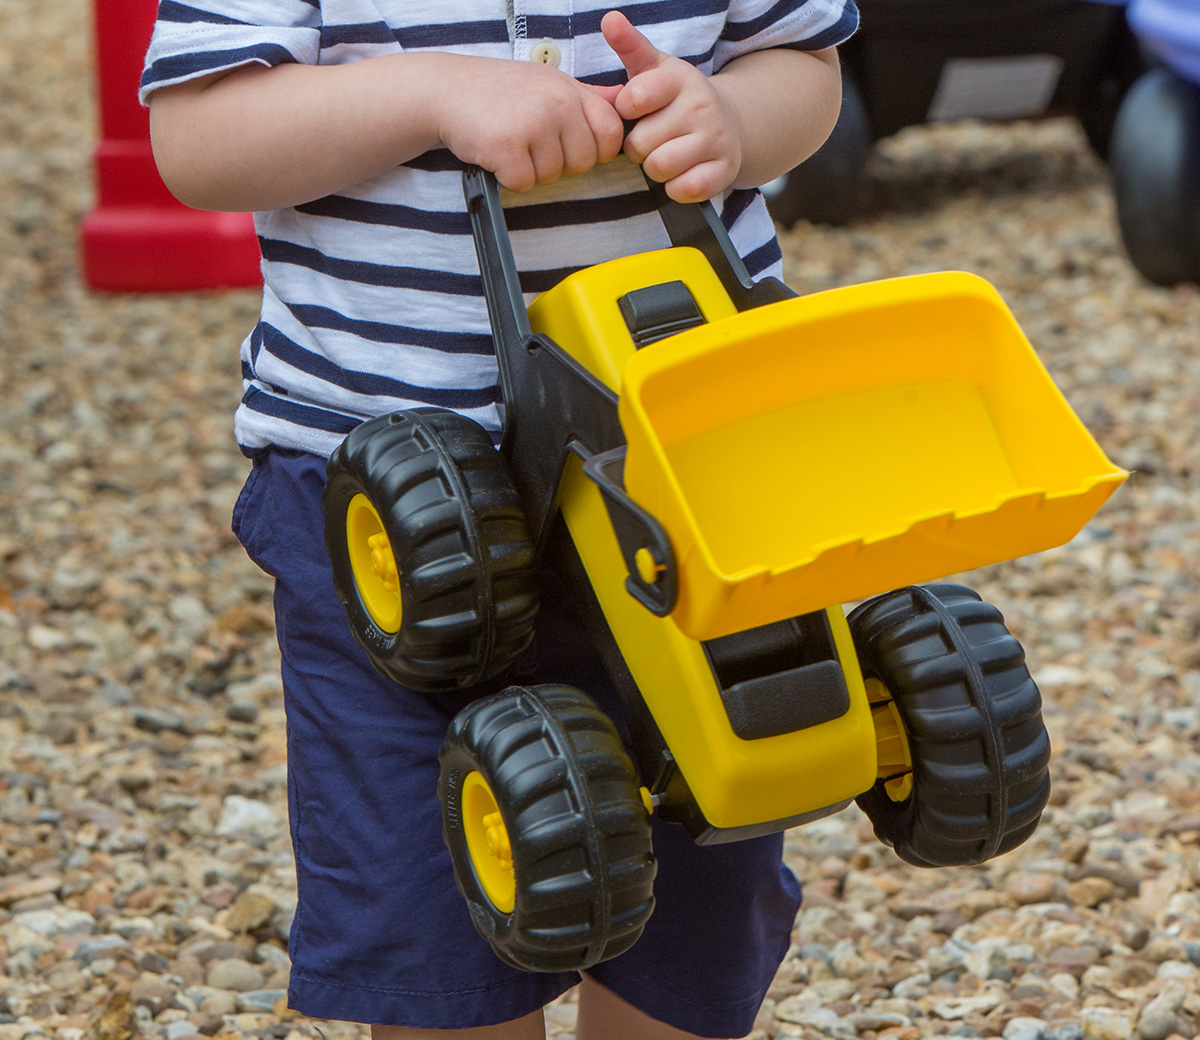 little tikes dirt diggers front loader